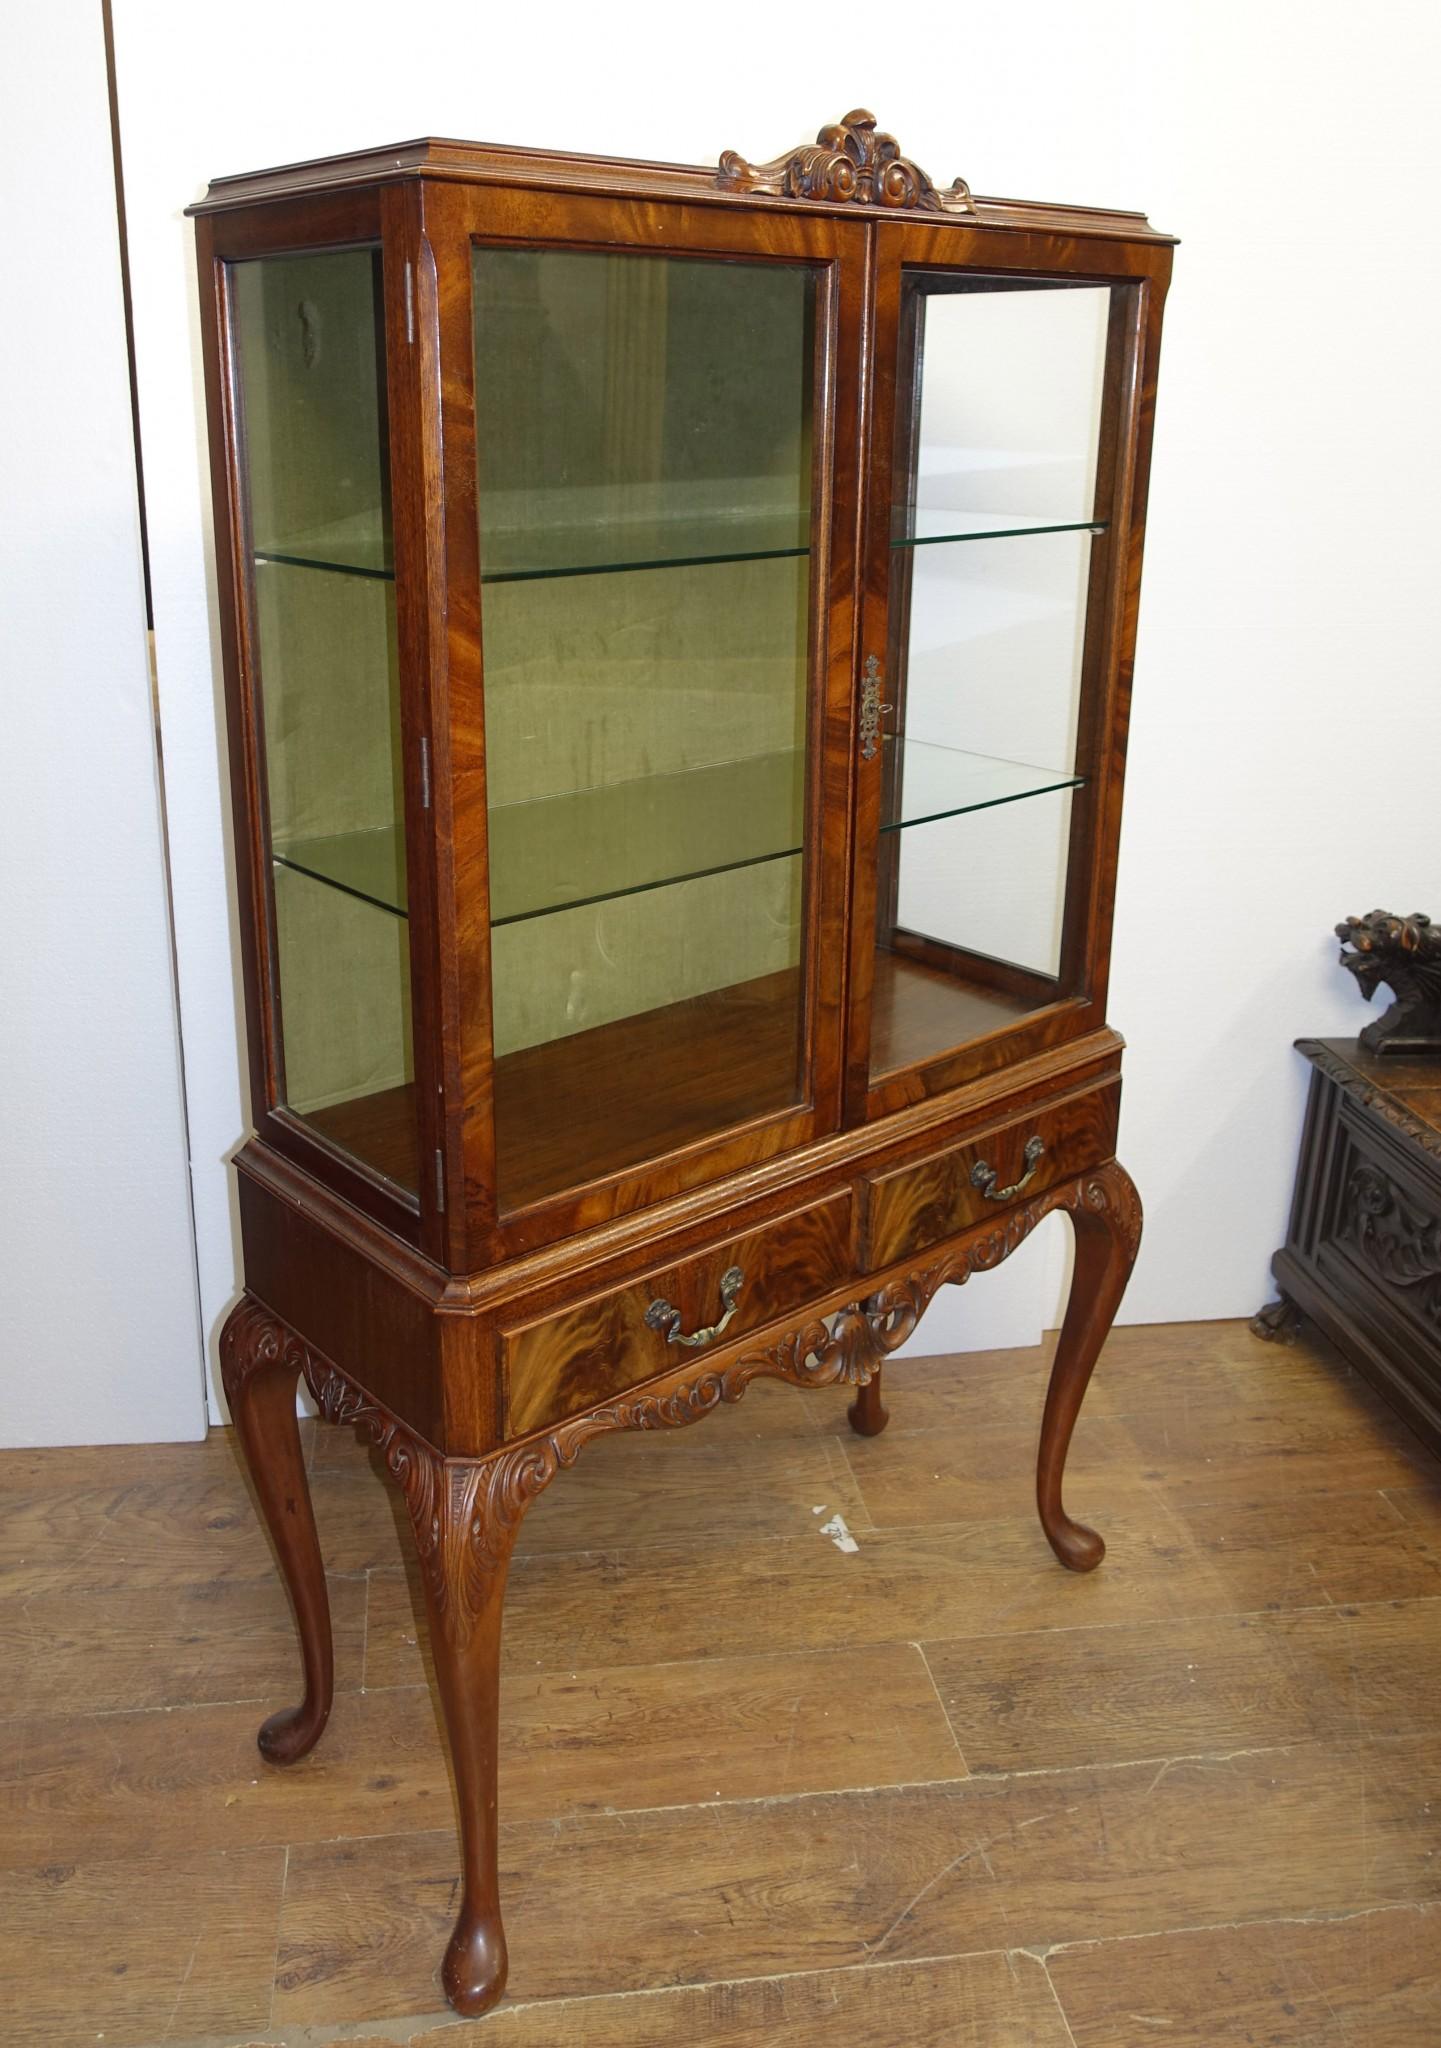 Elegant mahogany display cabinet after Epstein
Great piece to display decorative pieces such as porcelain and silver plate
Features two glass shelves and two drawers below so ample storage
Top half comes apart from the bottom half
Bought from a